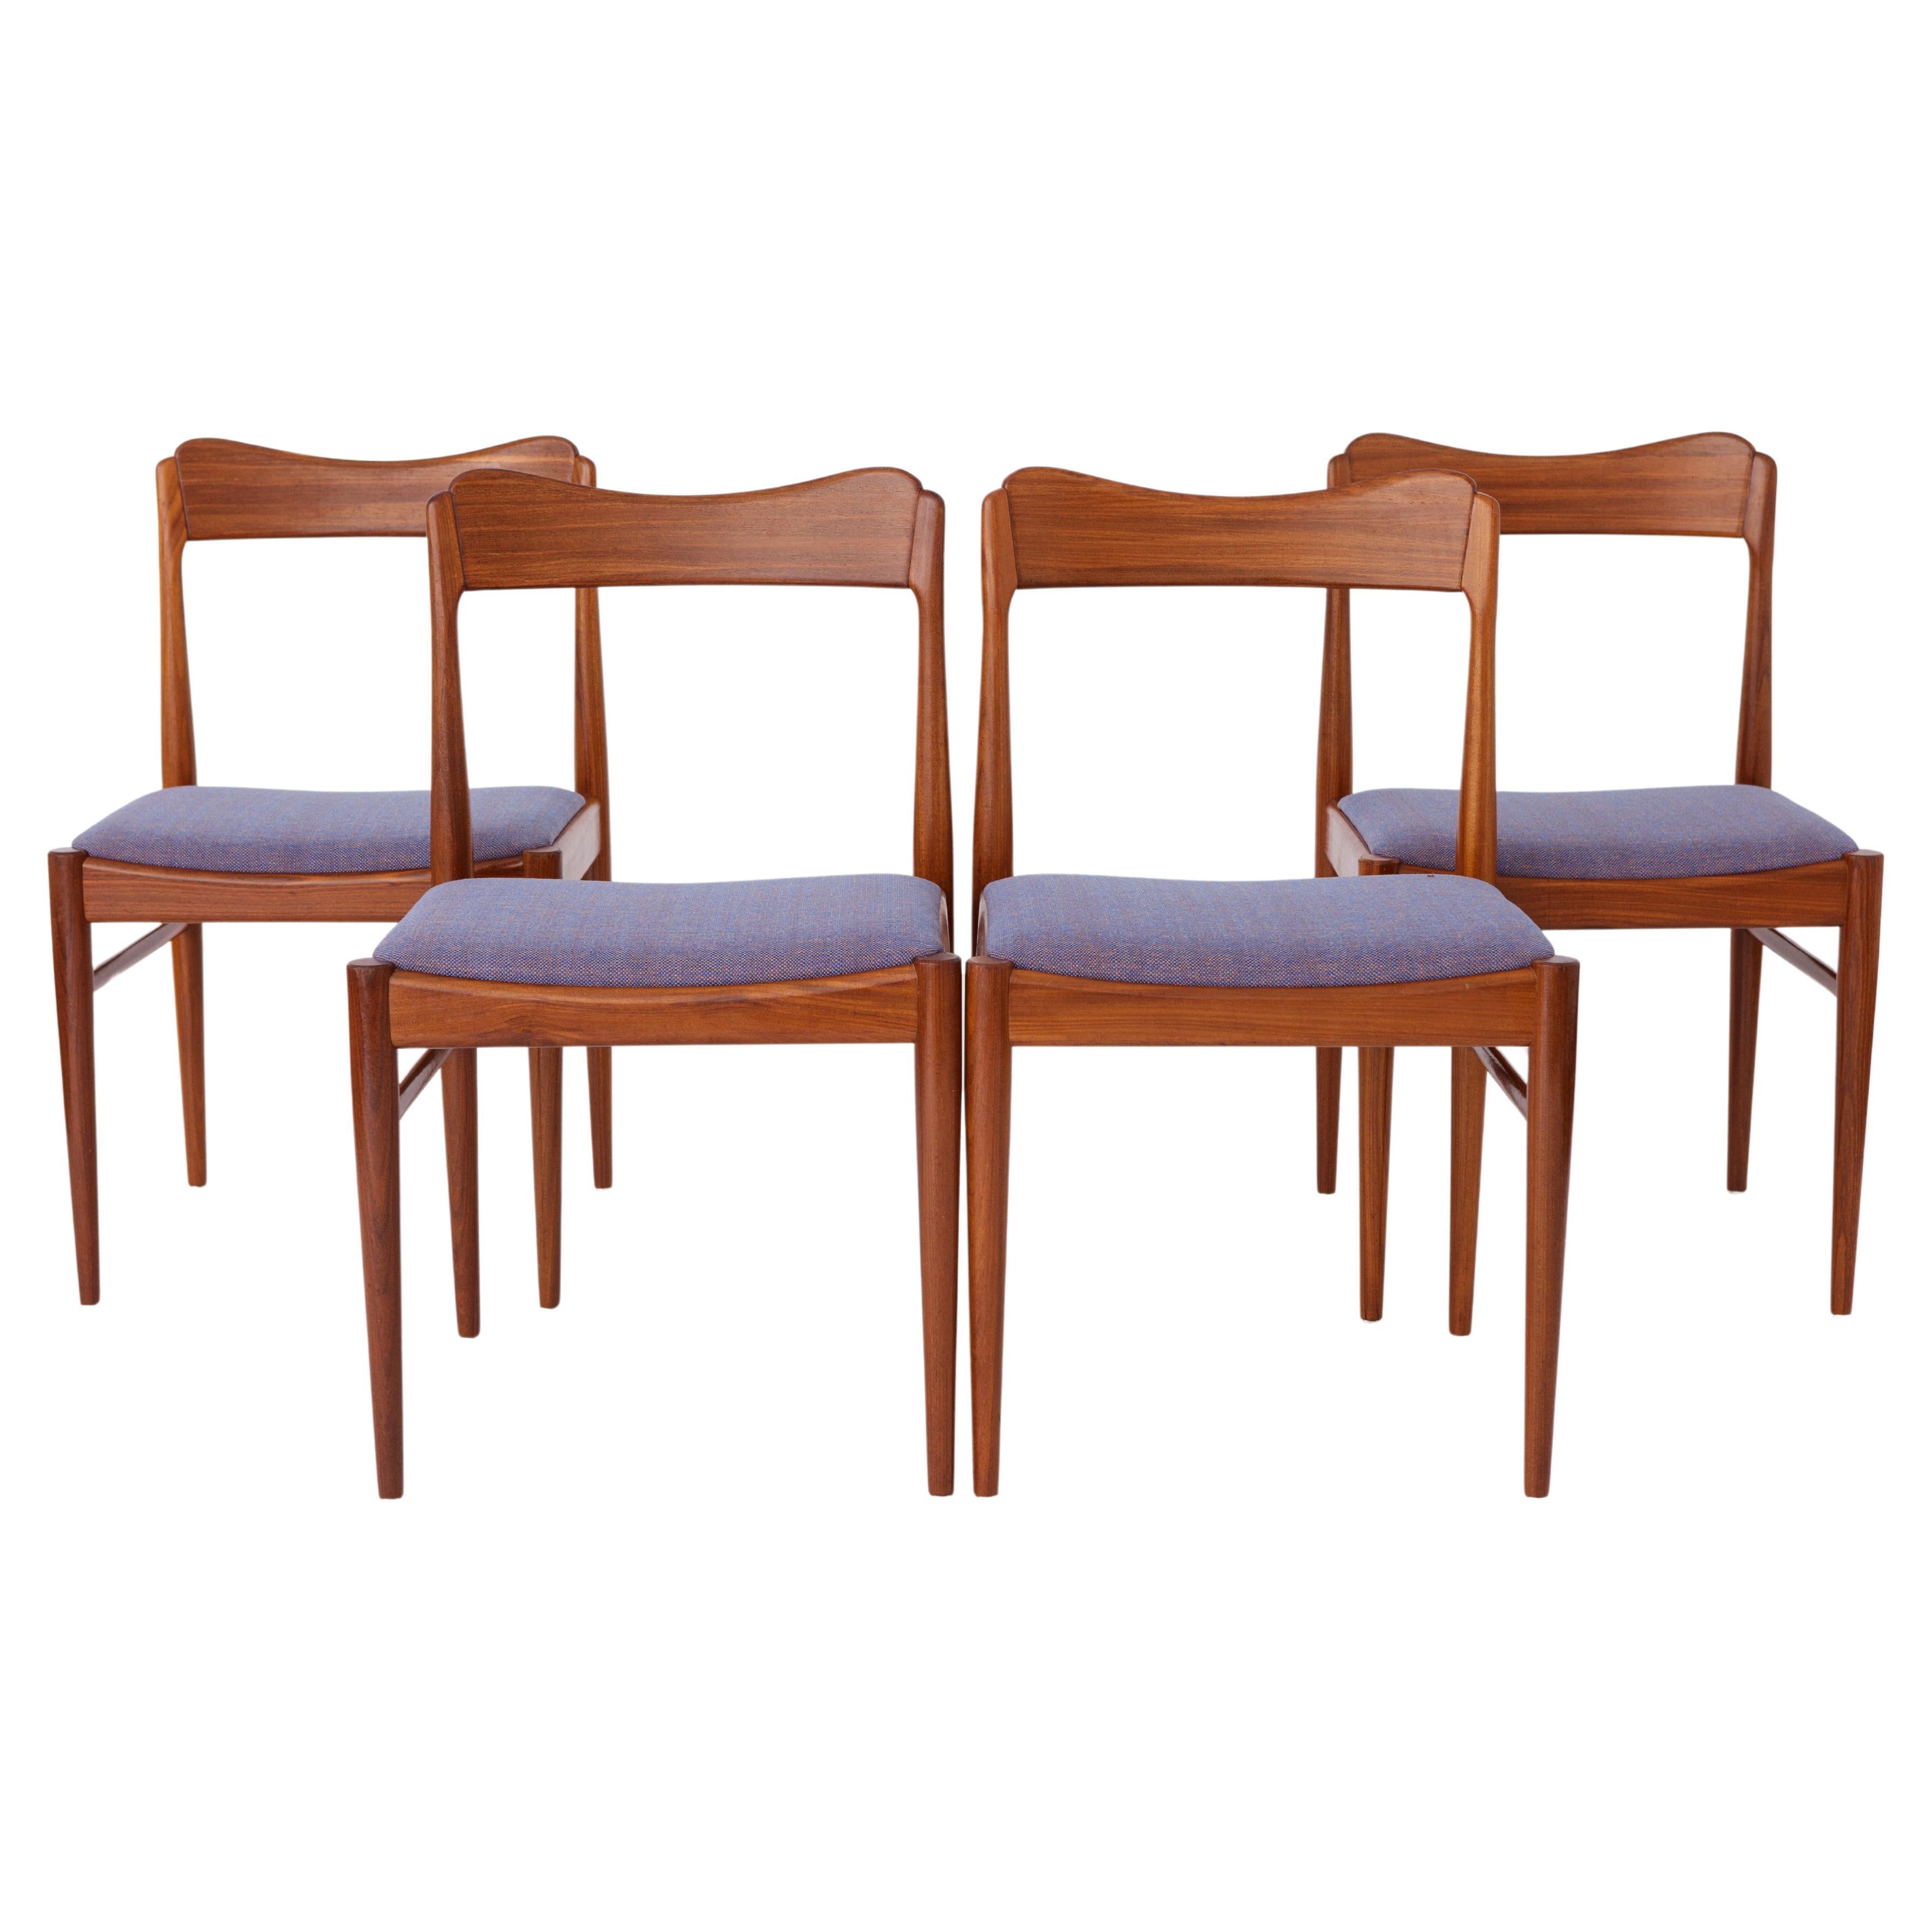 4 Vintage Dining Chairs 1960s Danish For Sale